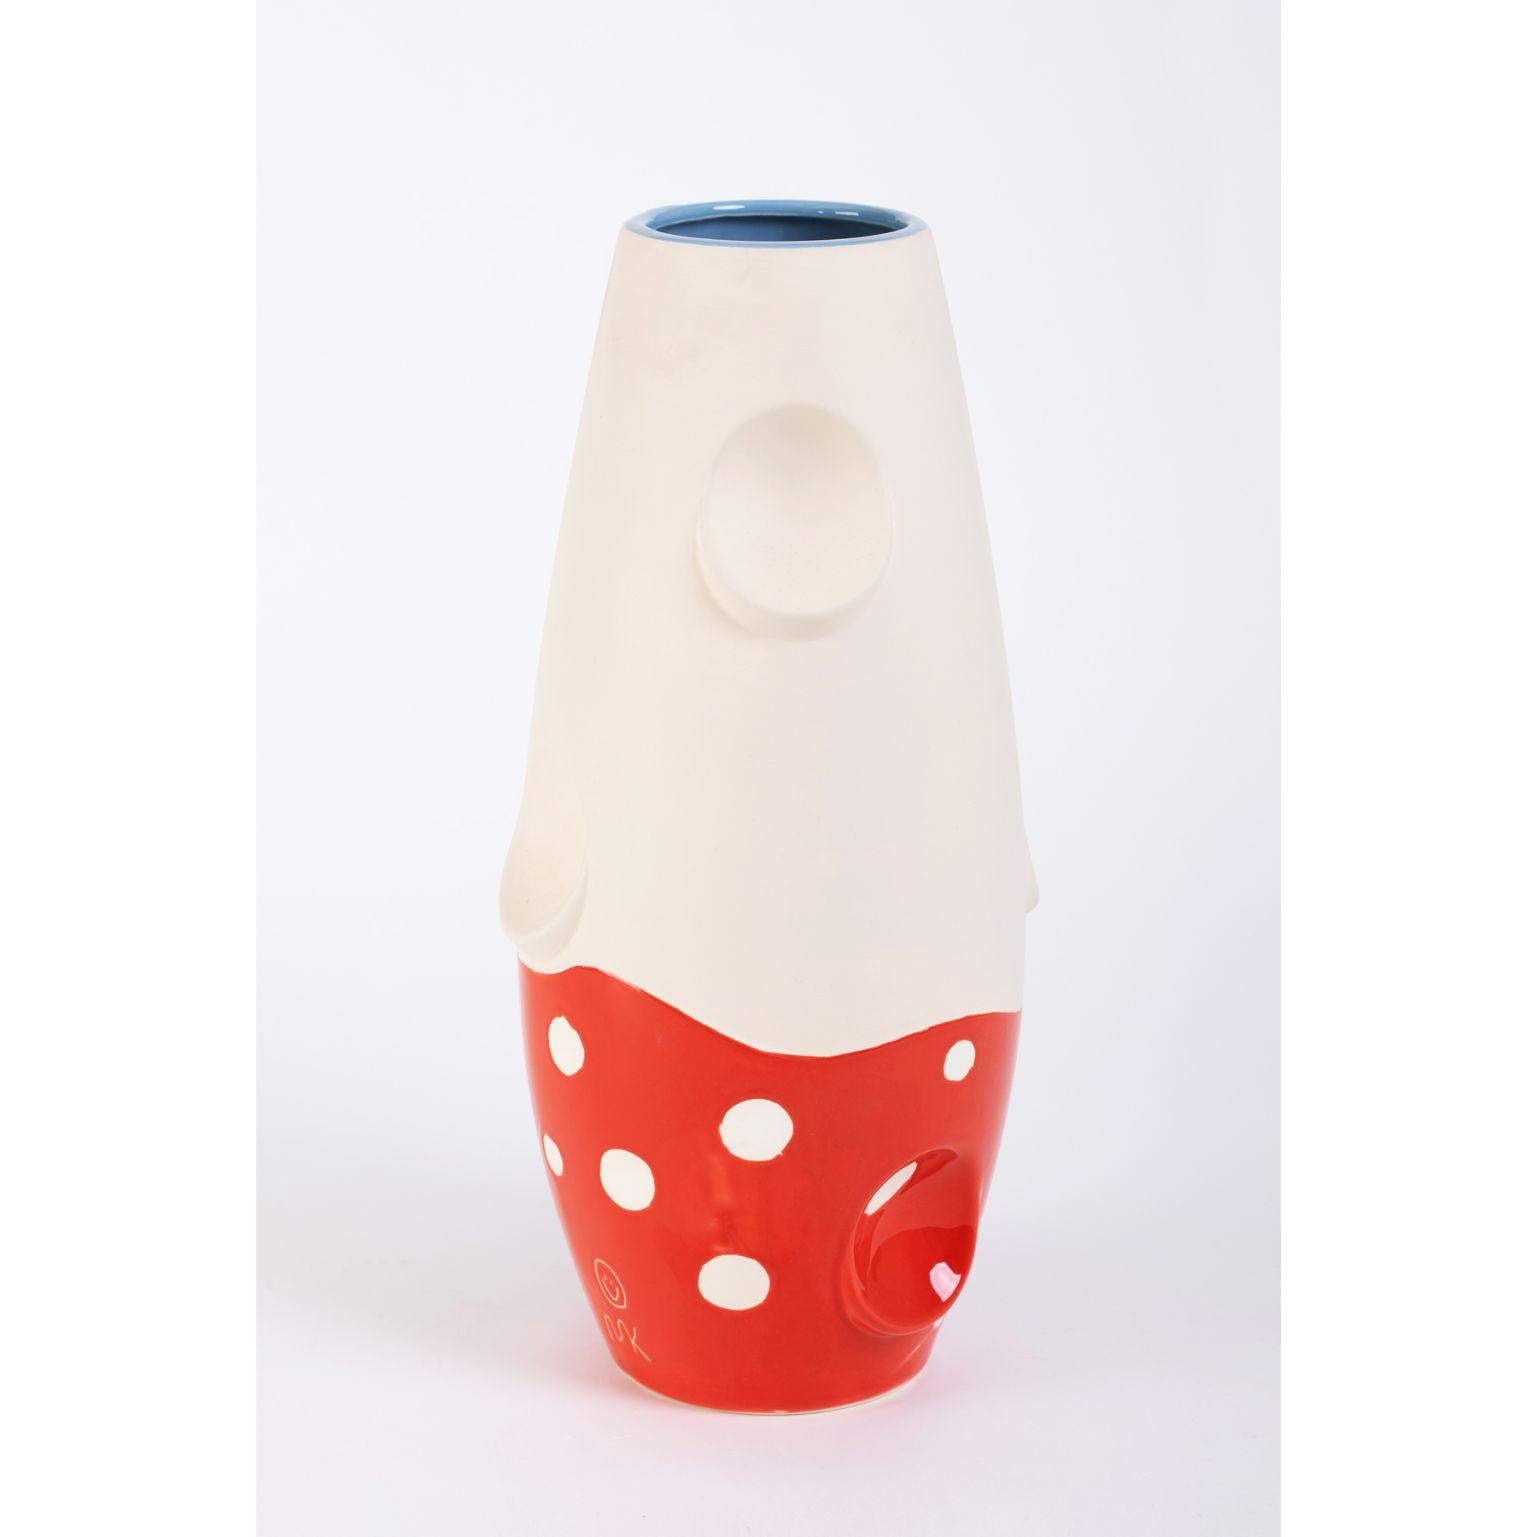 Oko pop ceramic vase - Mushroom by Malwina Konopacka
Unique Sculpture (decorated and hand-painted by the artist )
Materials: Impregnated ceramics, glazed interior with red glaze
Dimensions: D19, H42 cm

Also available: Circus, denim daisy,